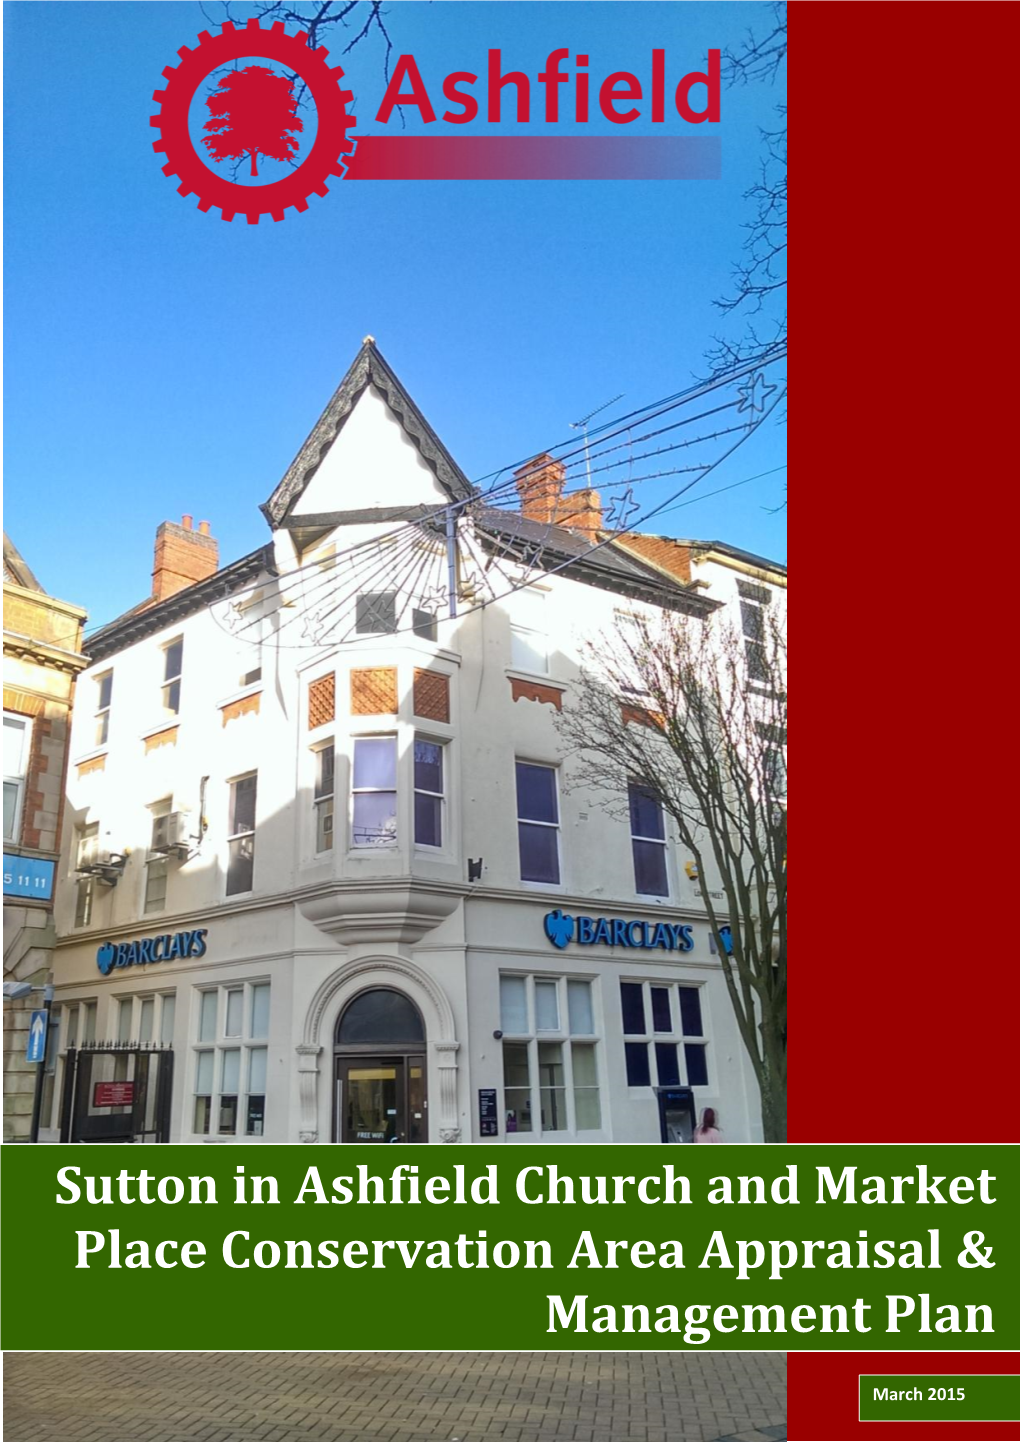 Sutton in Ashfield Church and Market Place Conservation Area Appraisal